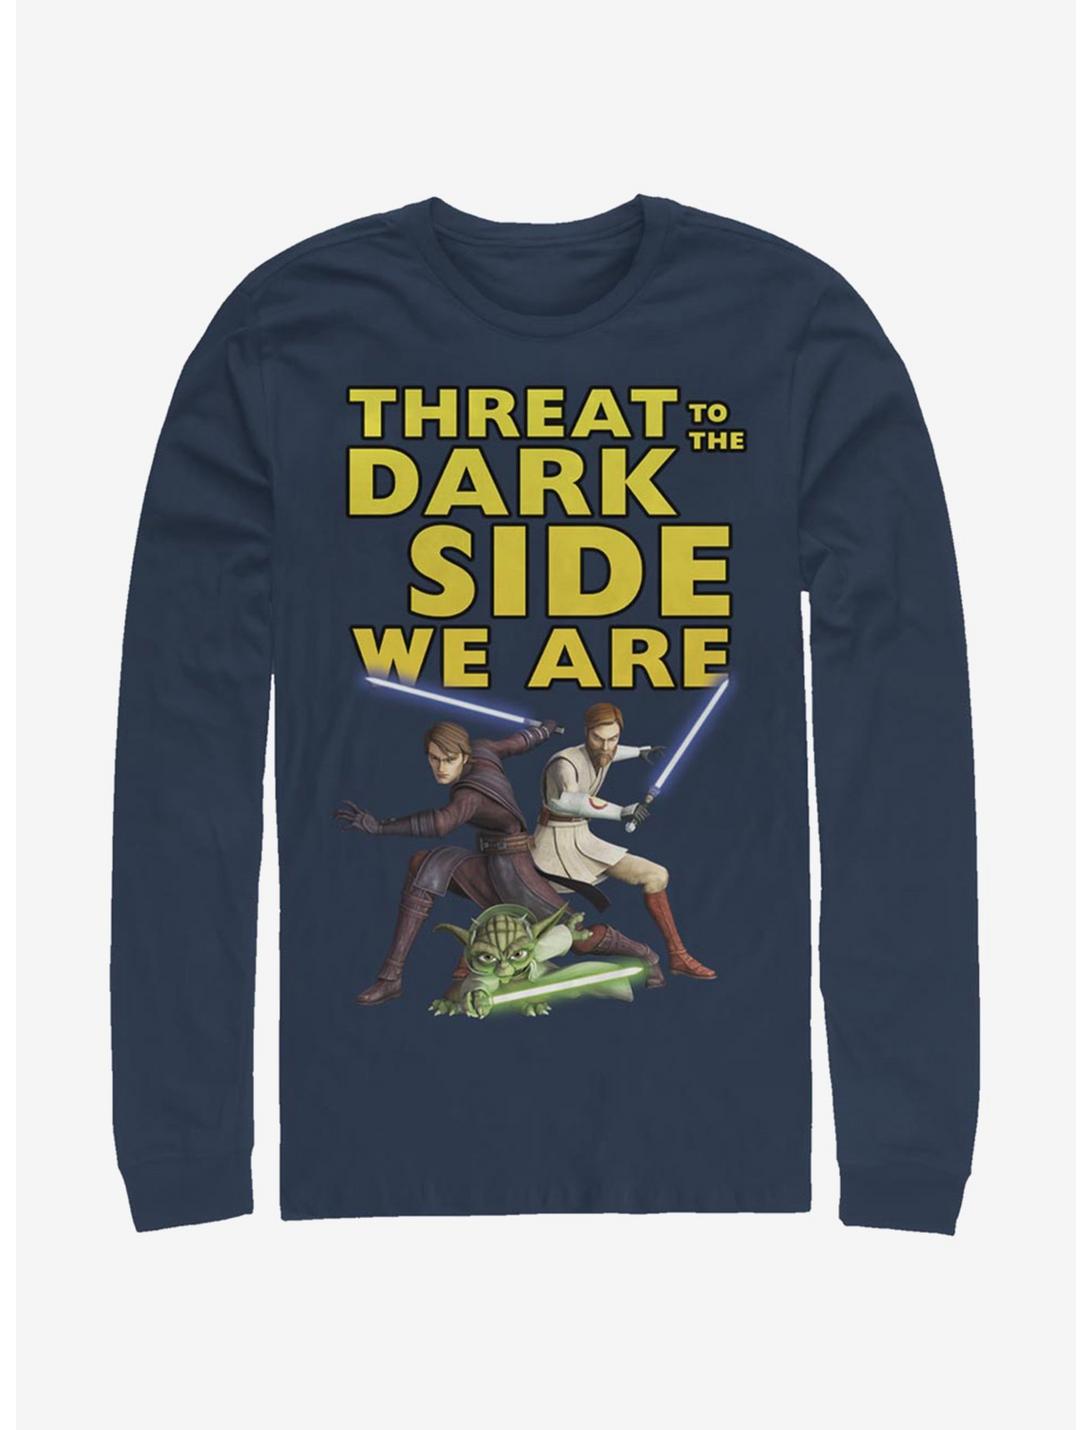 Star Wars: The Clone Wars Threat We Are Long-Sleeve T-Shirt, NAVY, hi-res